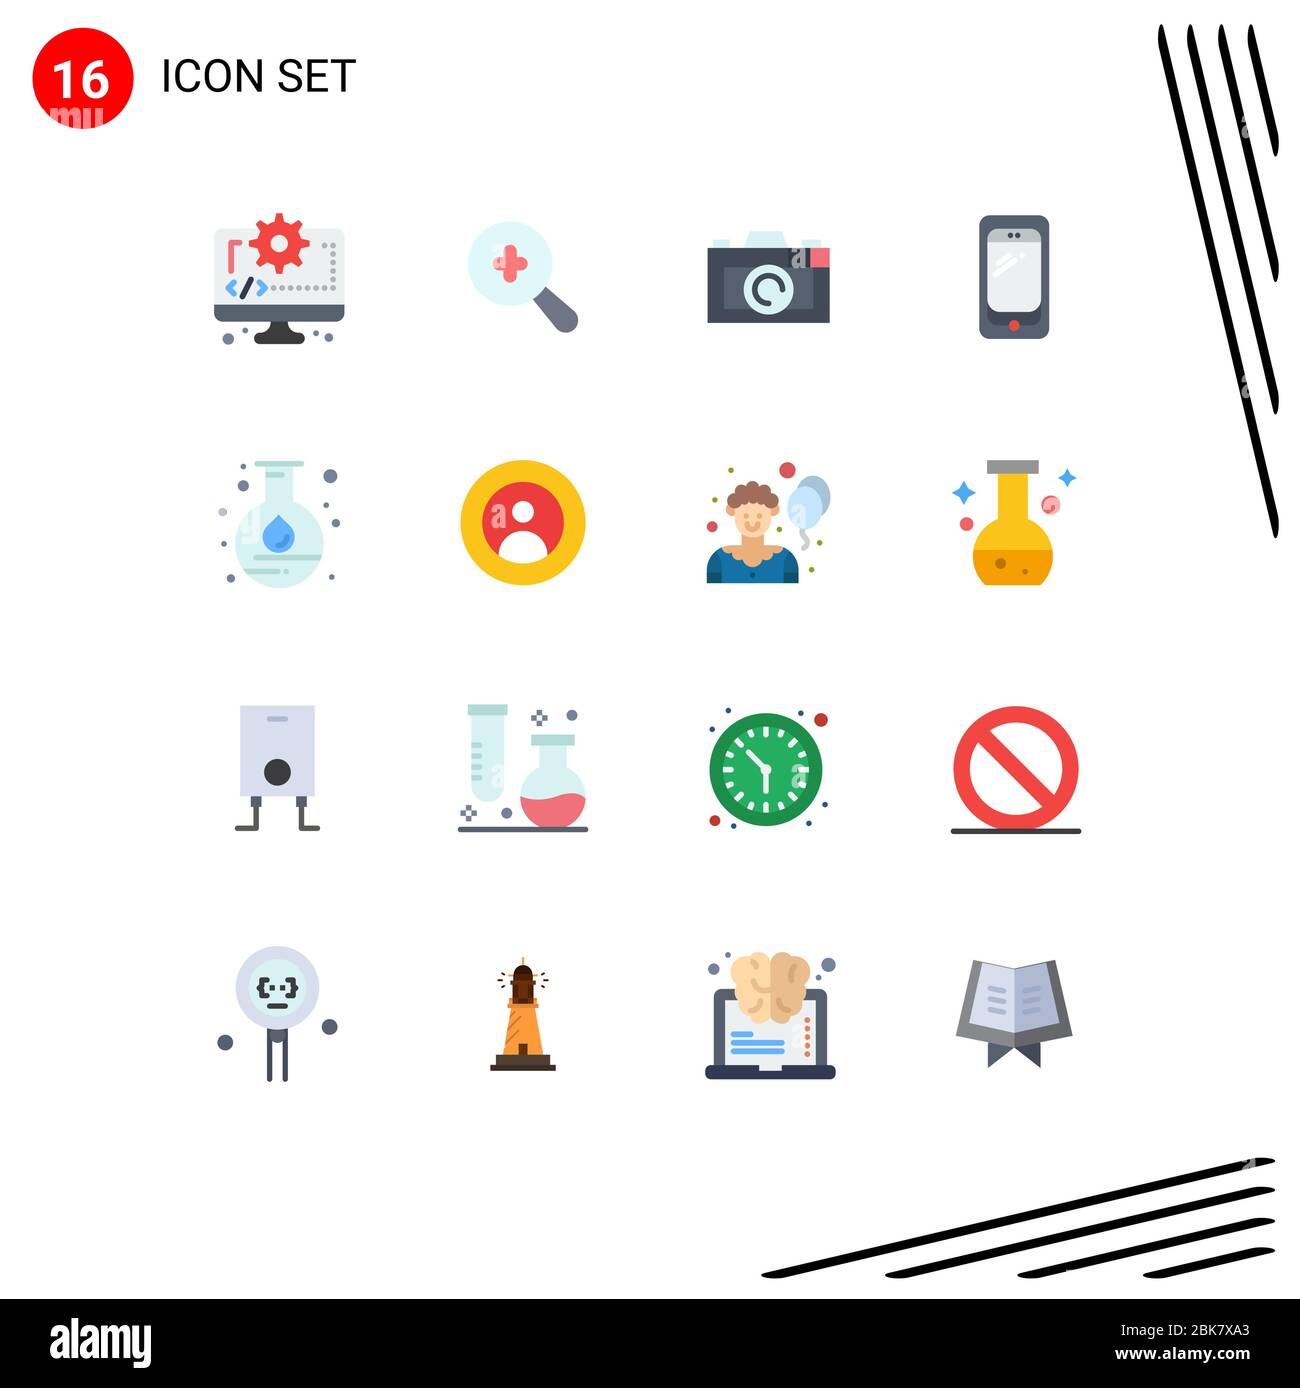 User Interface Pack of 16 Basic Flat Colors of lab, energy, picture, samsung, mobile Editable Pack of Creative Vector Design Elements Stock Vector